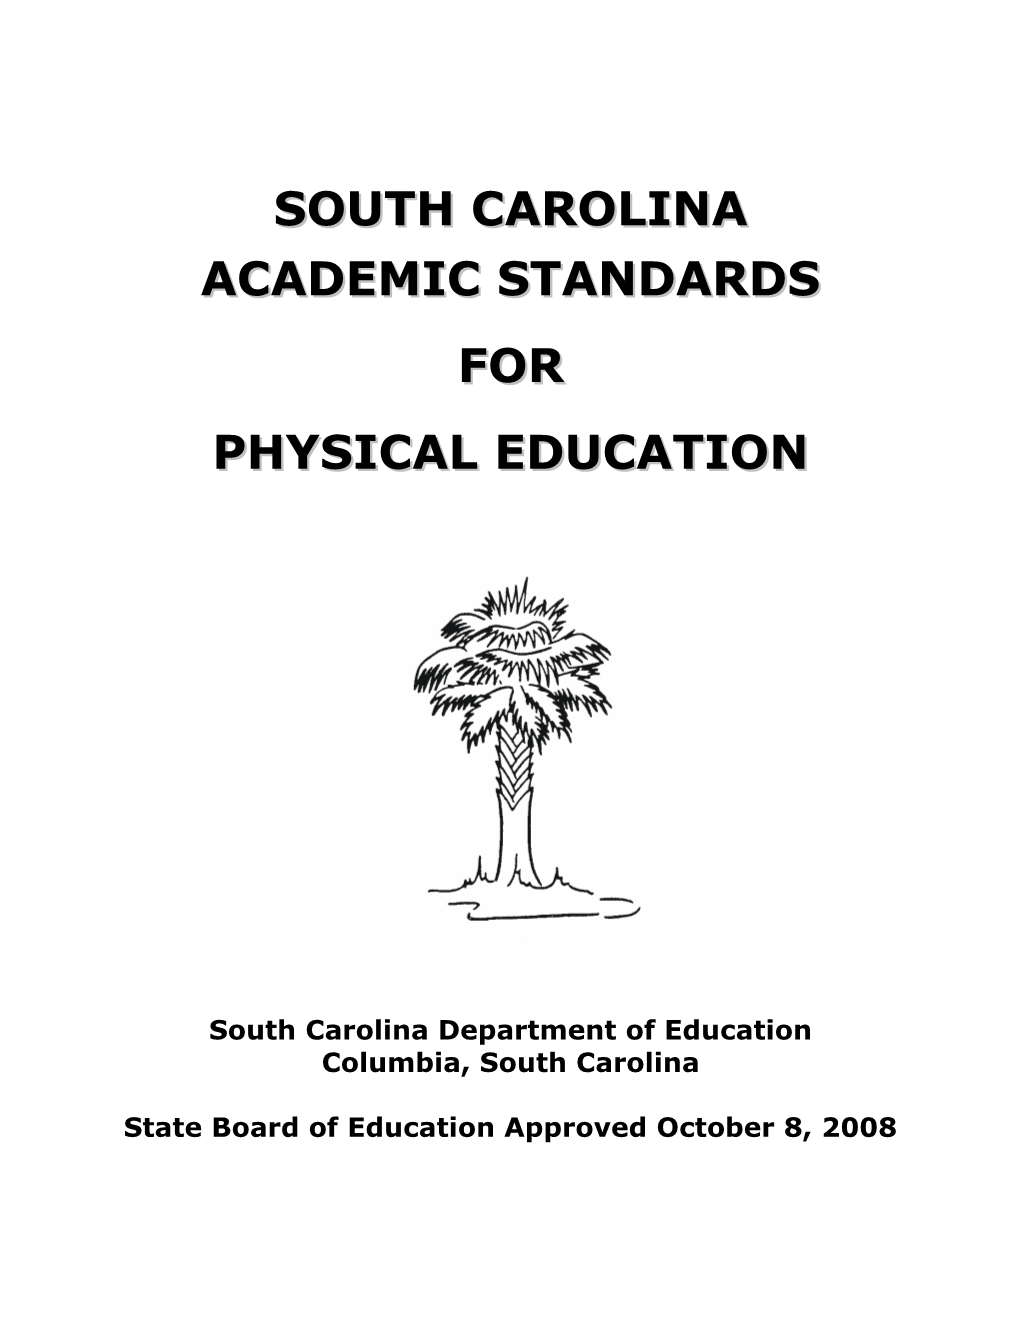 South Carolina Academic Standards for Physical Education